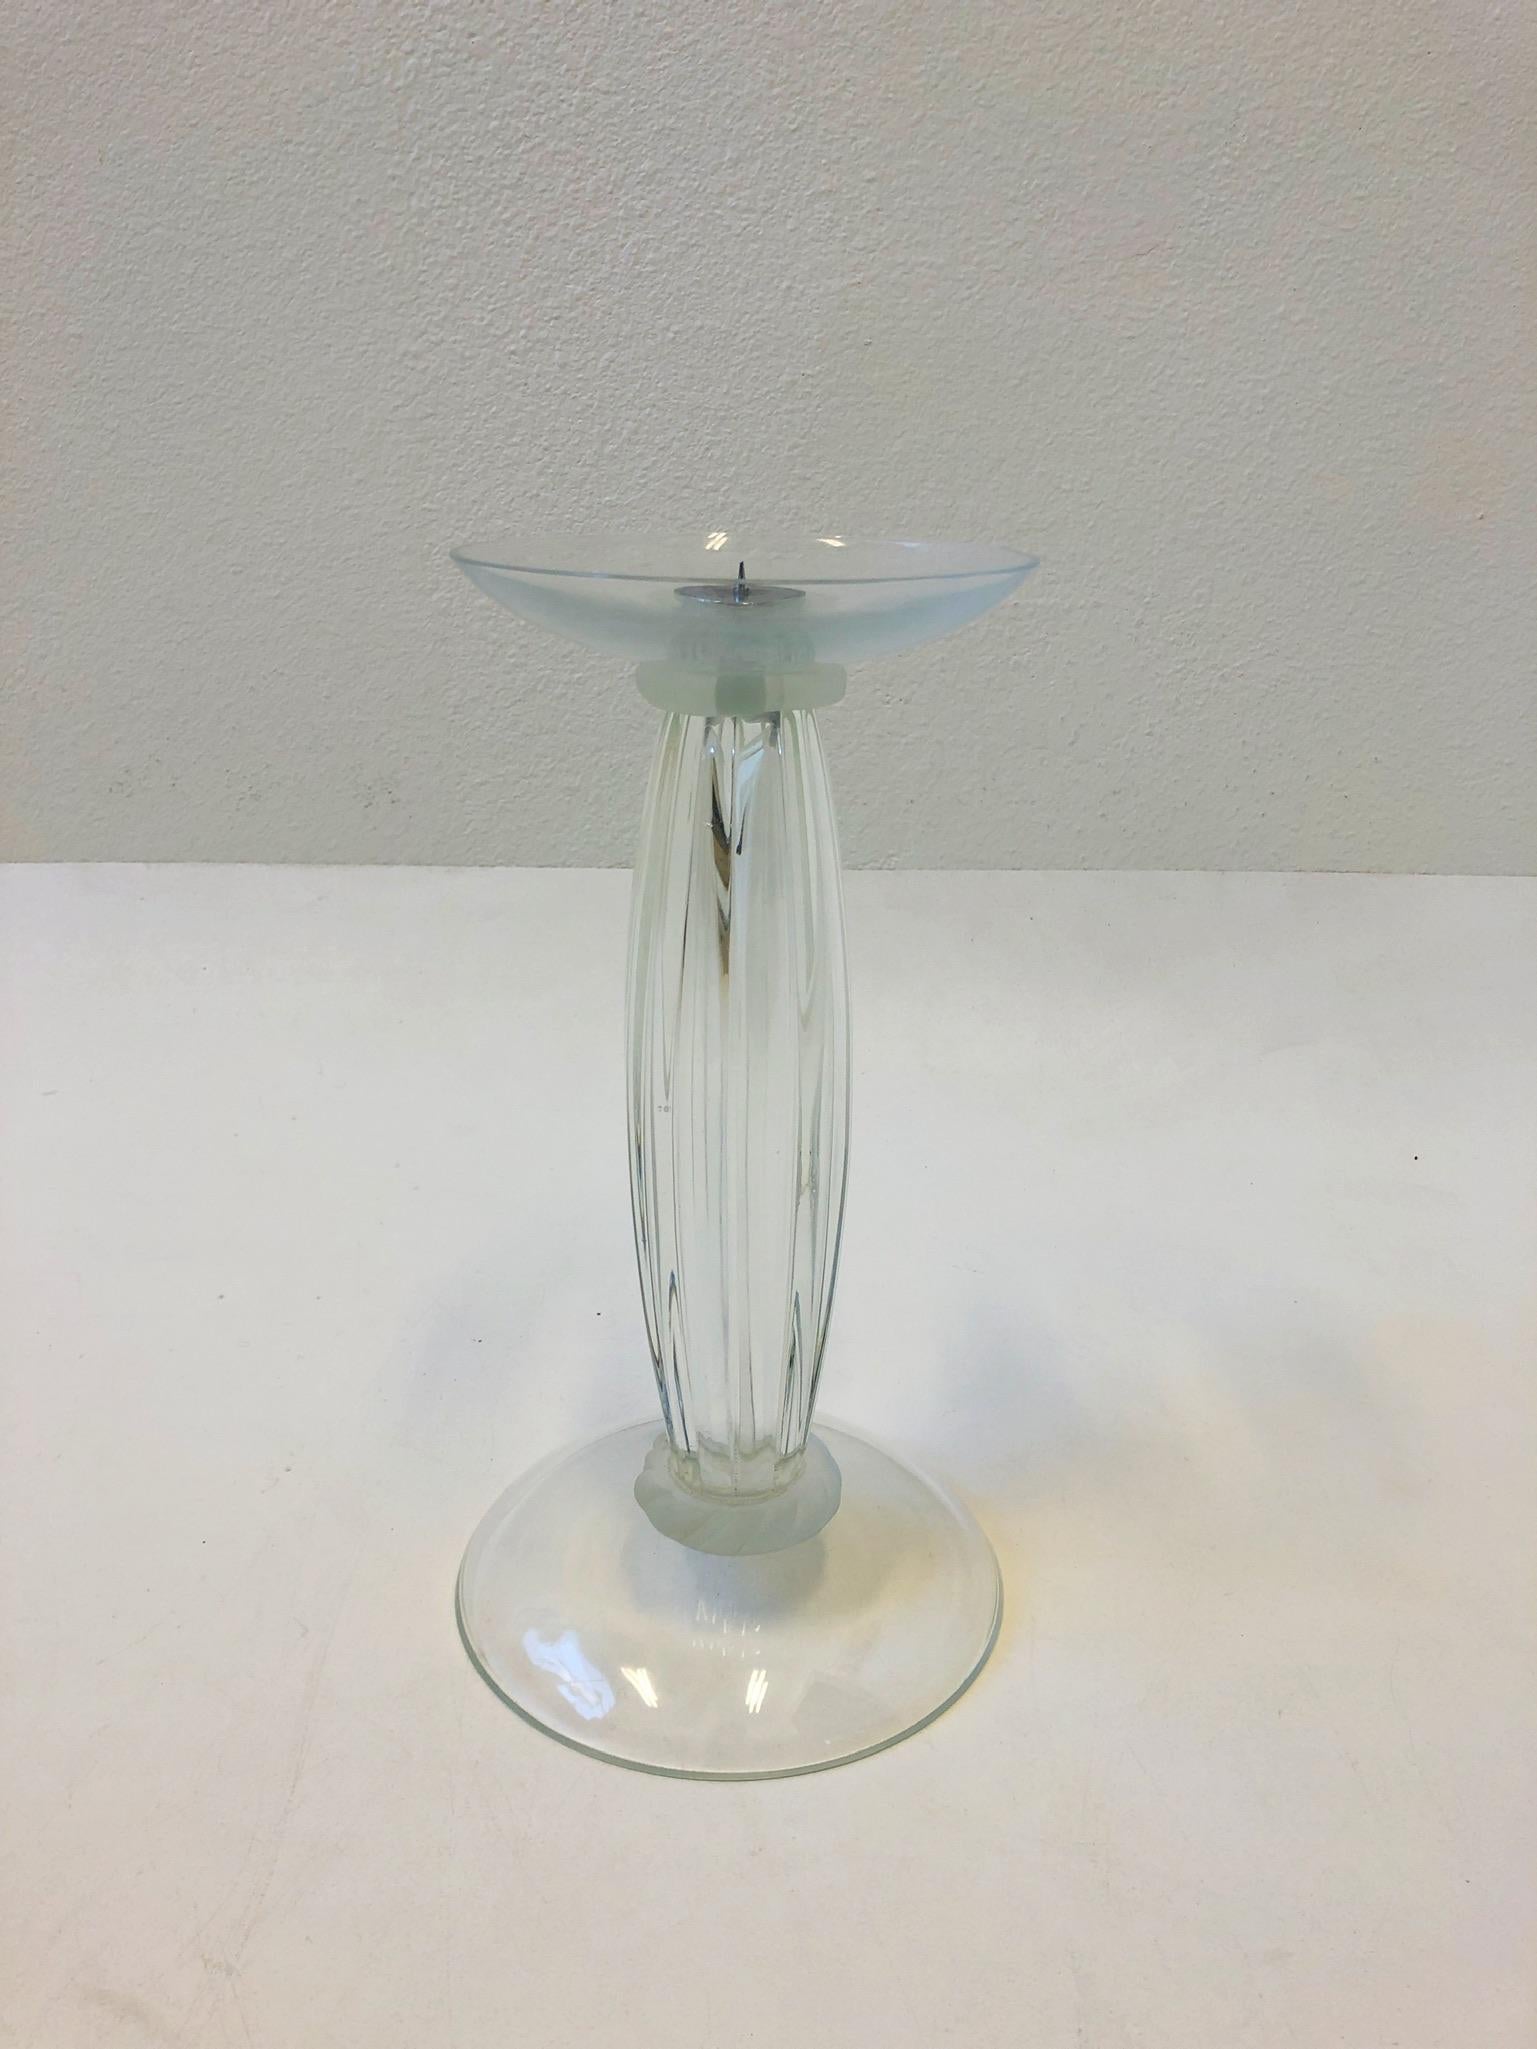 Glamorous 1980s hand blown Murano glass candleholder designed by Karl Springer. Hand signed by Karl Springer (see detail photos).
Measurements: 14.25” high and 7.75” diameter.